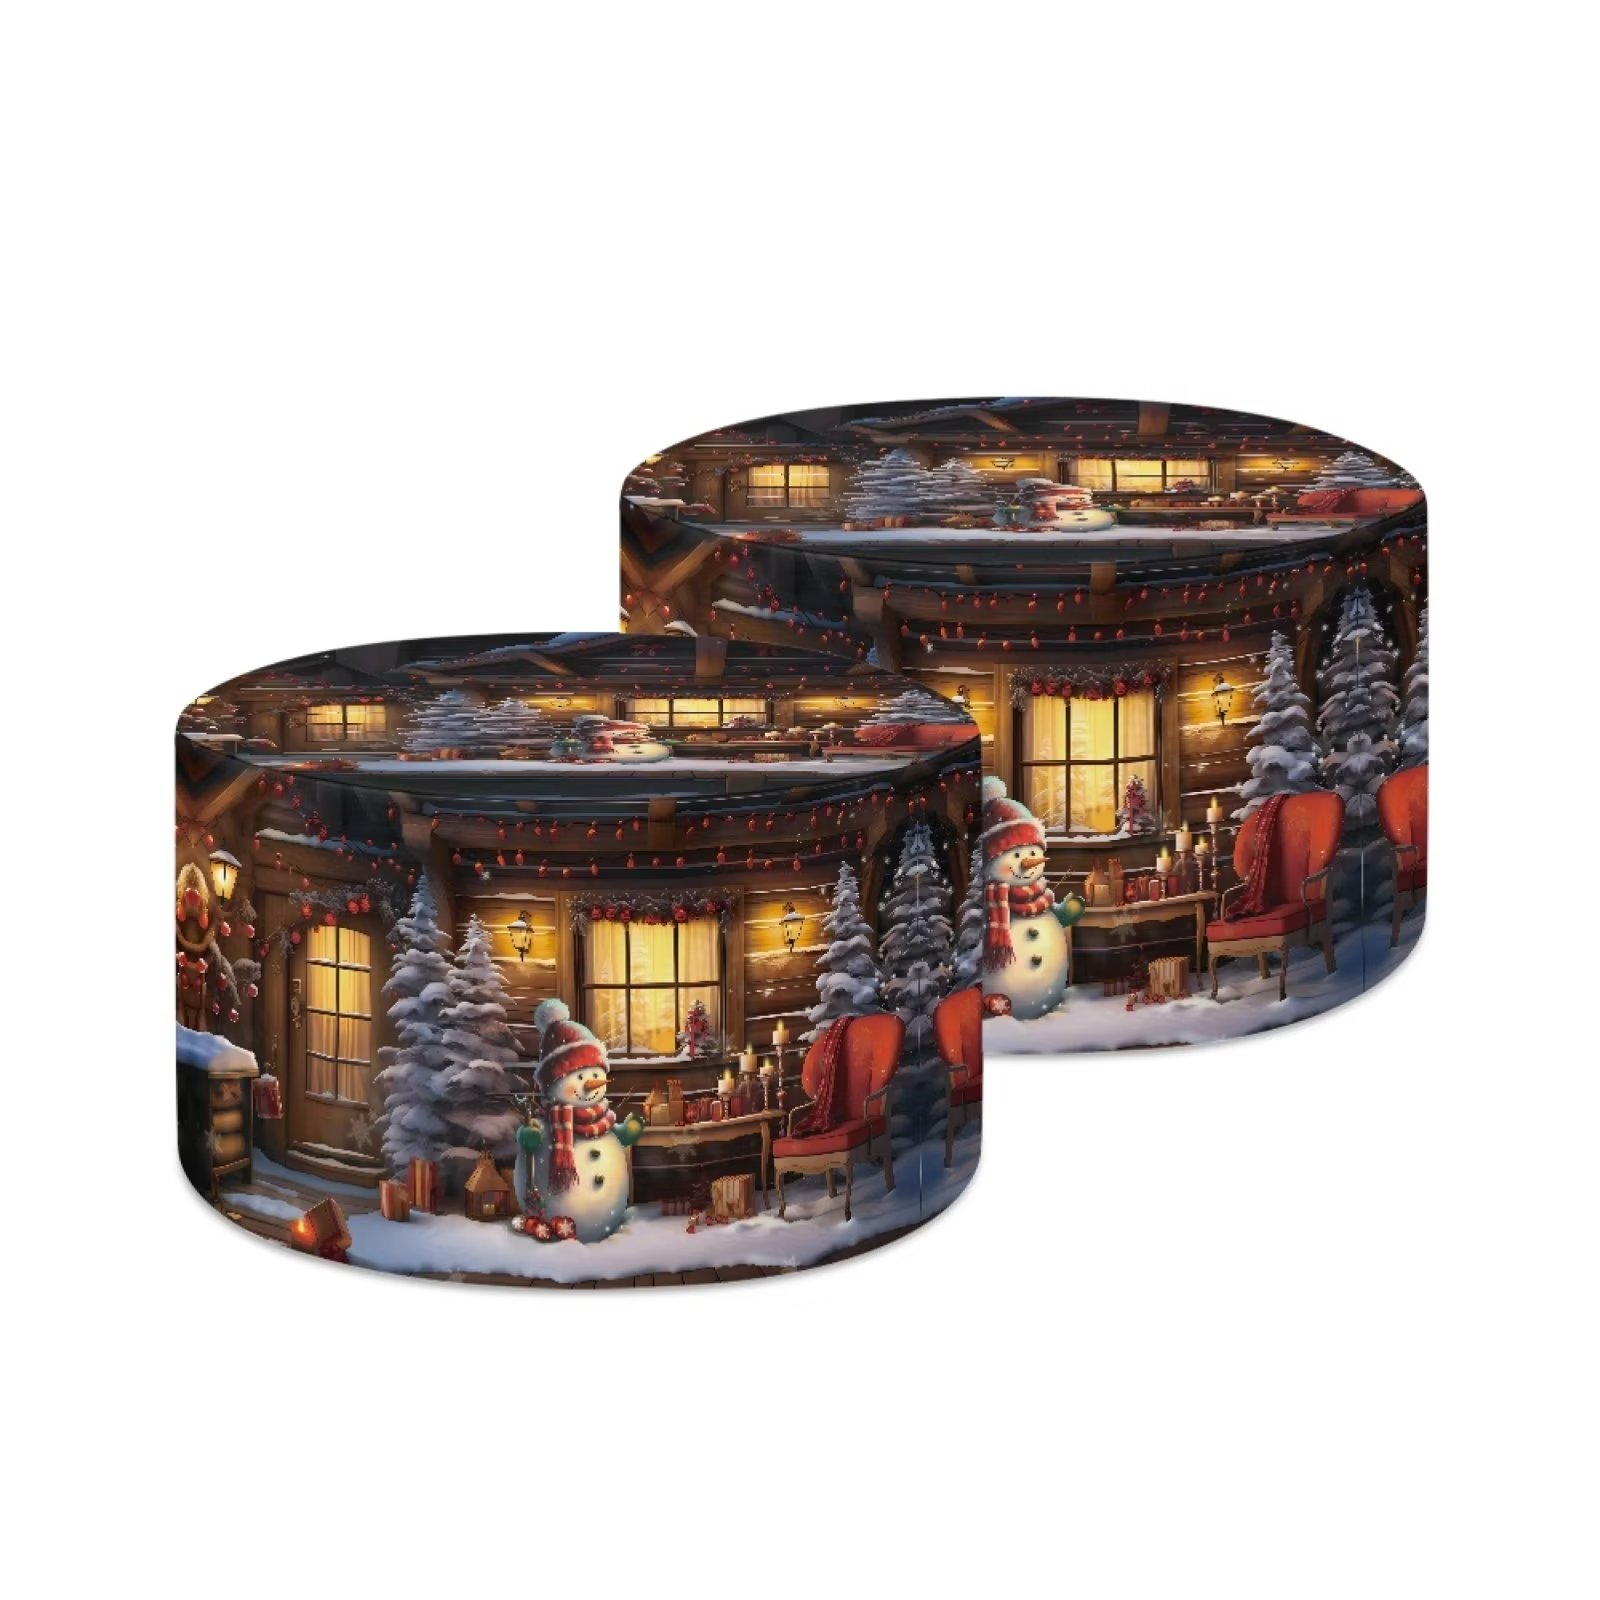 Pzuqiu Christmas Tree Lamp Shade Cover Snowman Light Accessories Lightweight Fabric Replacement Lampshade 2-Pack Drum Office Floors Lamp Cover,13.6" Top x 13.6" Bottom x 8.3" High - image 2 of 8